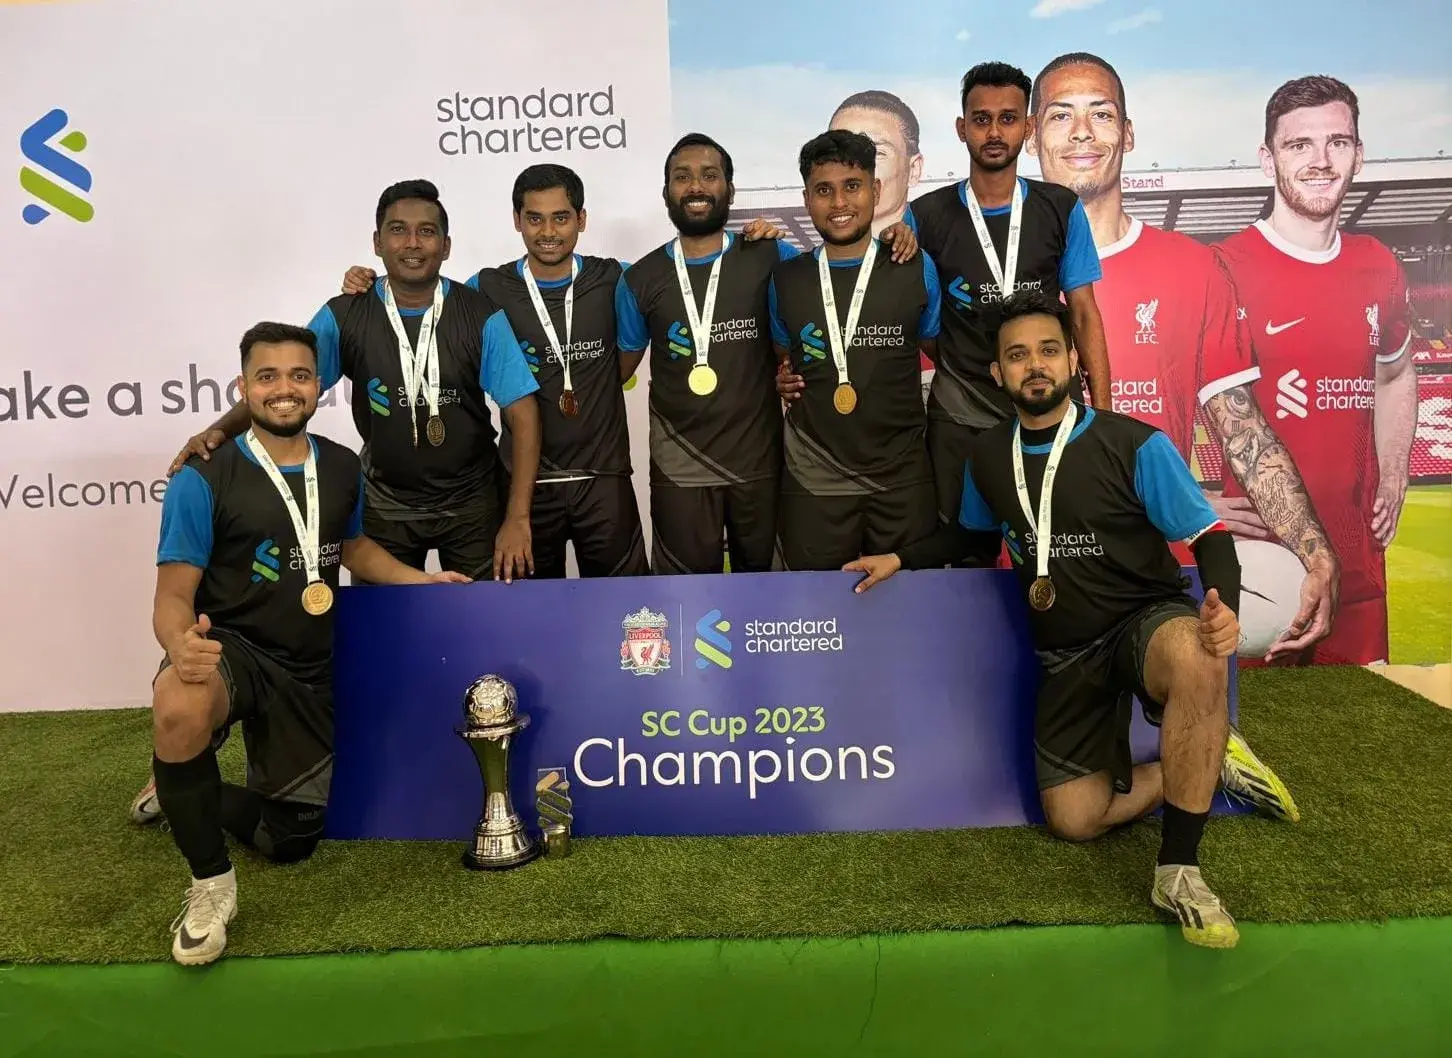 Standard Chartered Cup 2023 comes to a thrilling finish with LTIMindtree lifting the coveted trophy.